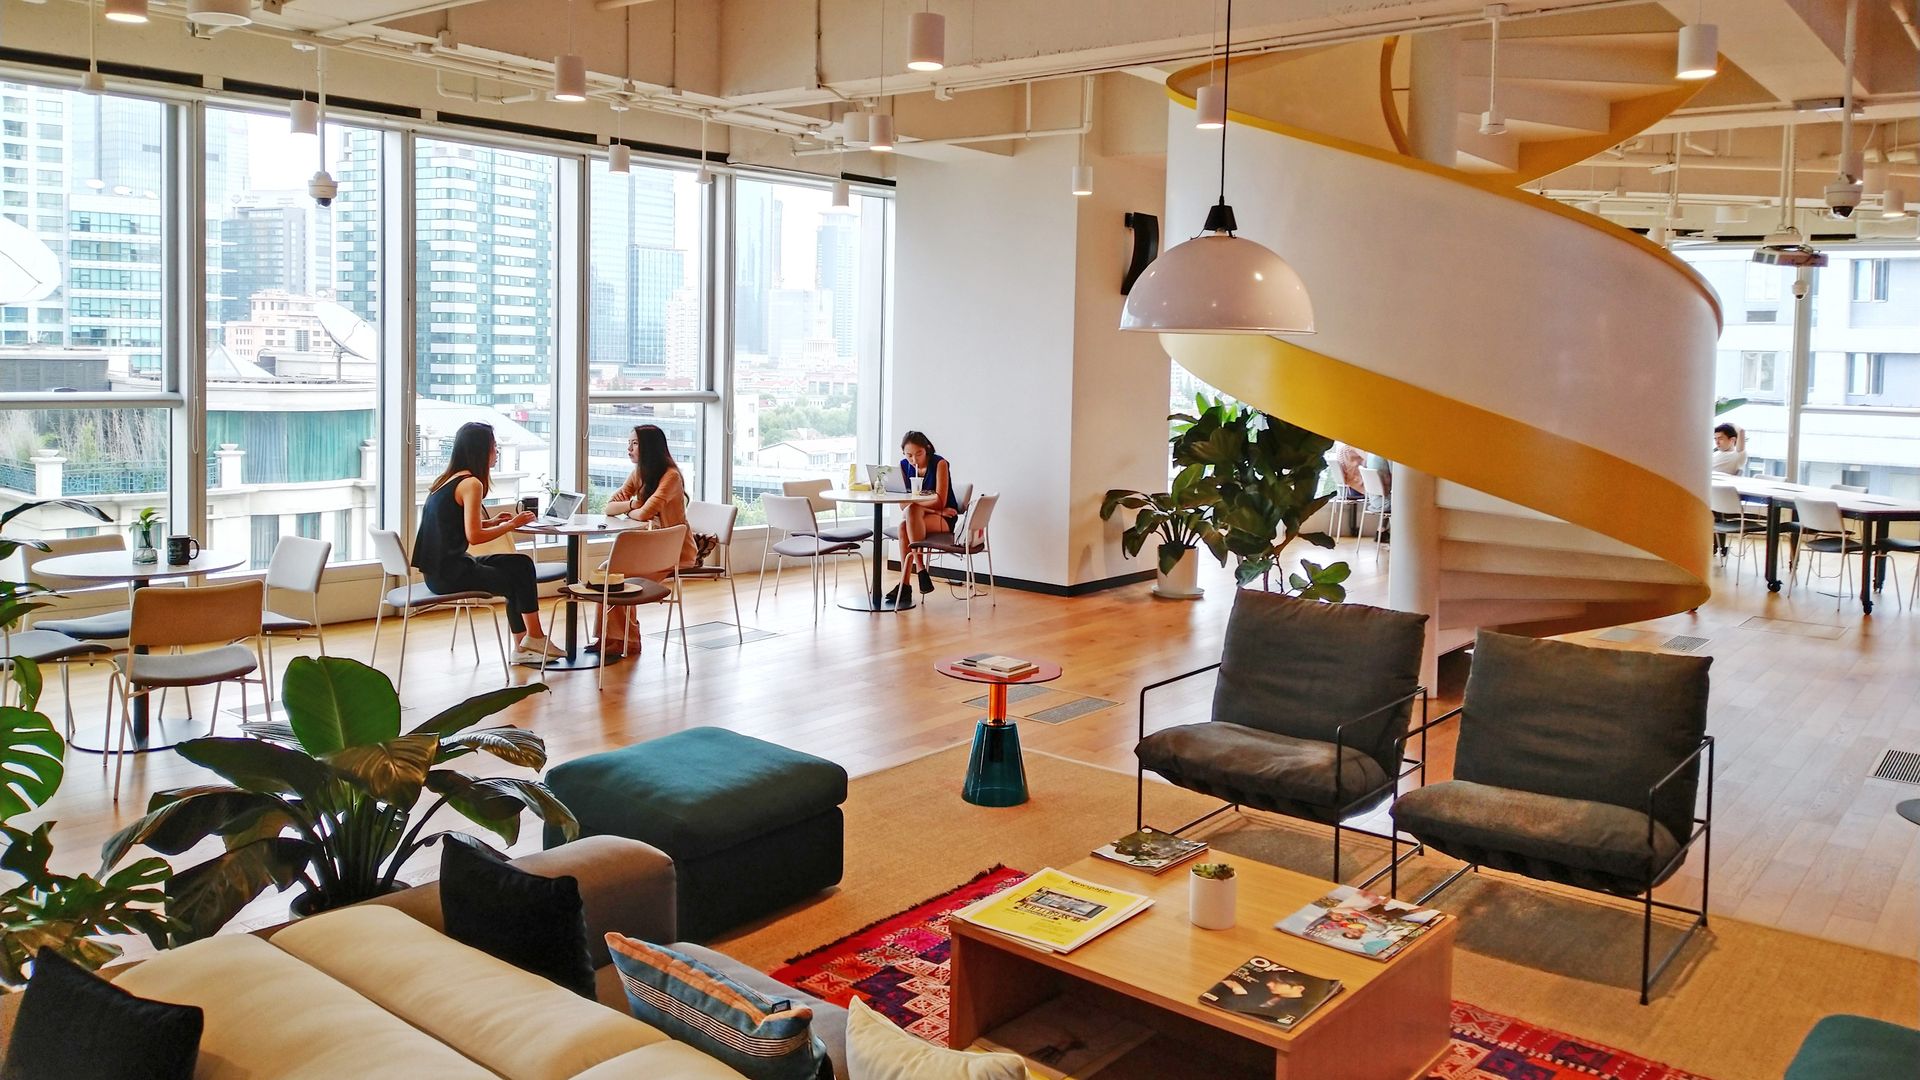 Employees work at a WeWork office in Shanghai, China, Aug. 13, 2019.